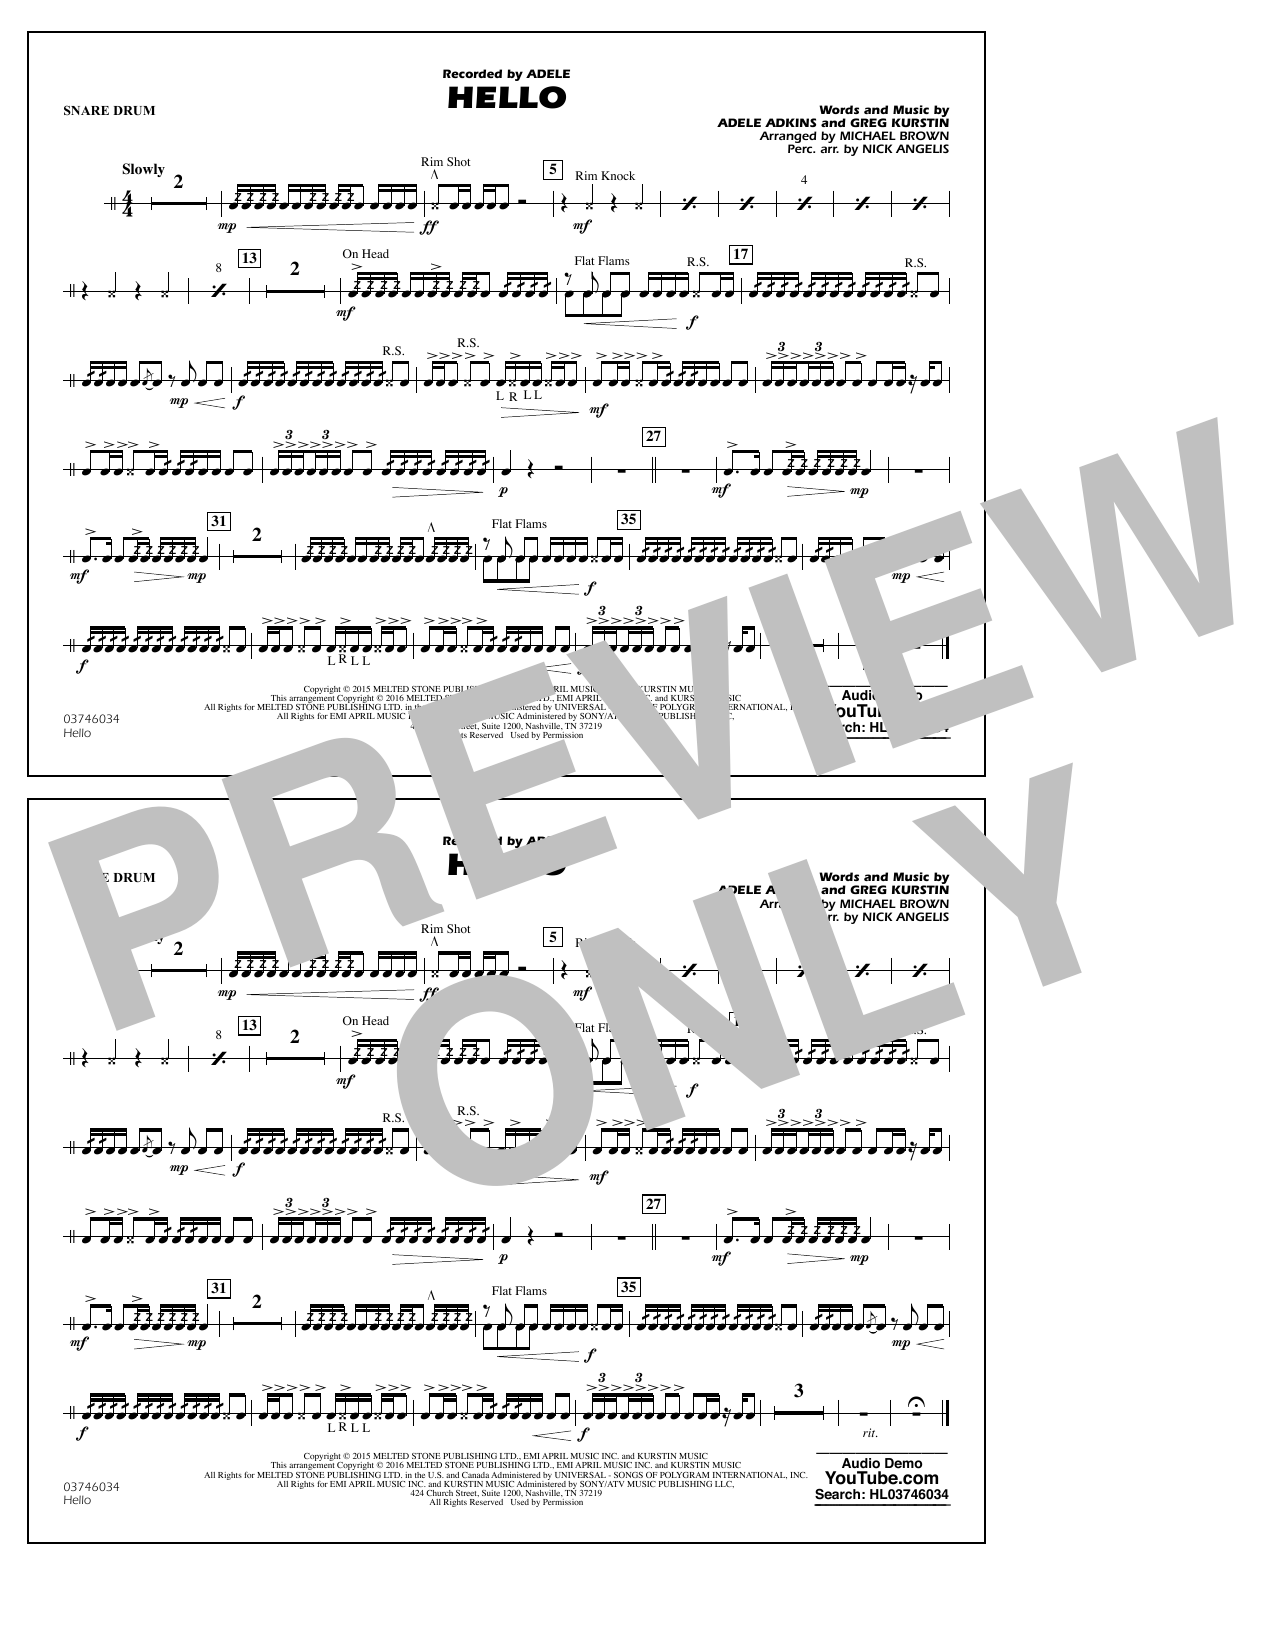 Download Michael Brown Hello - Snare Drum Sheet Music